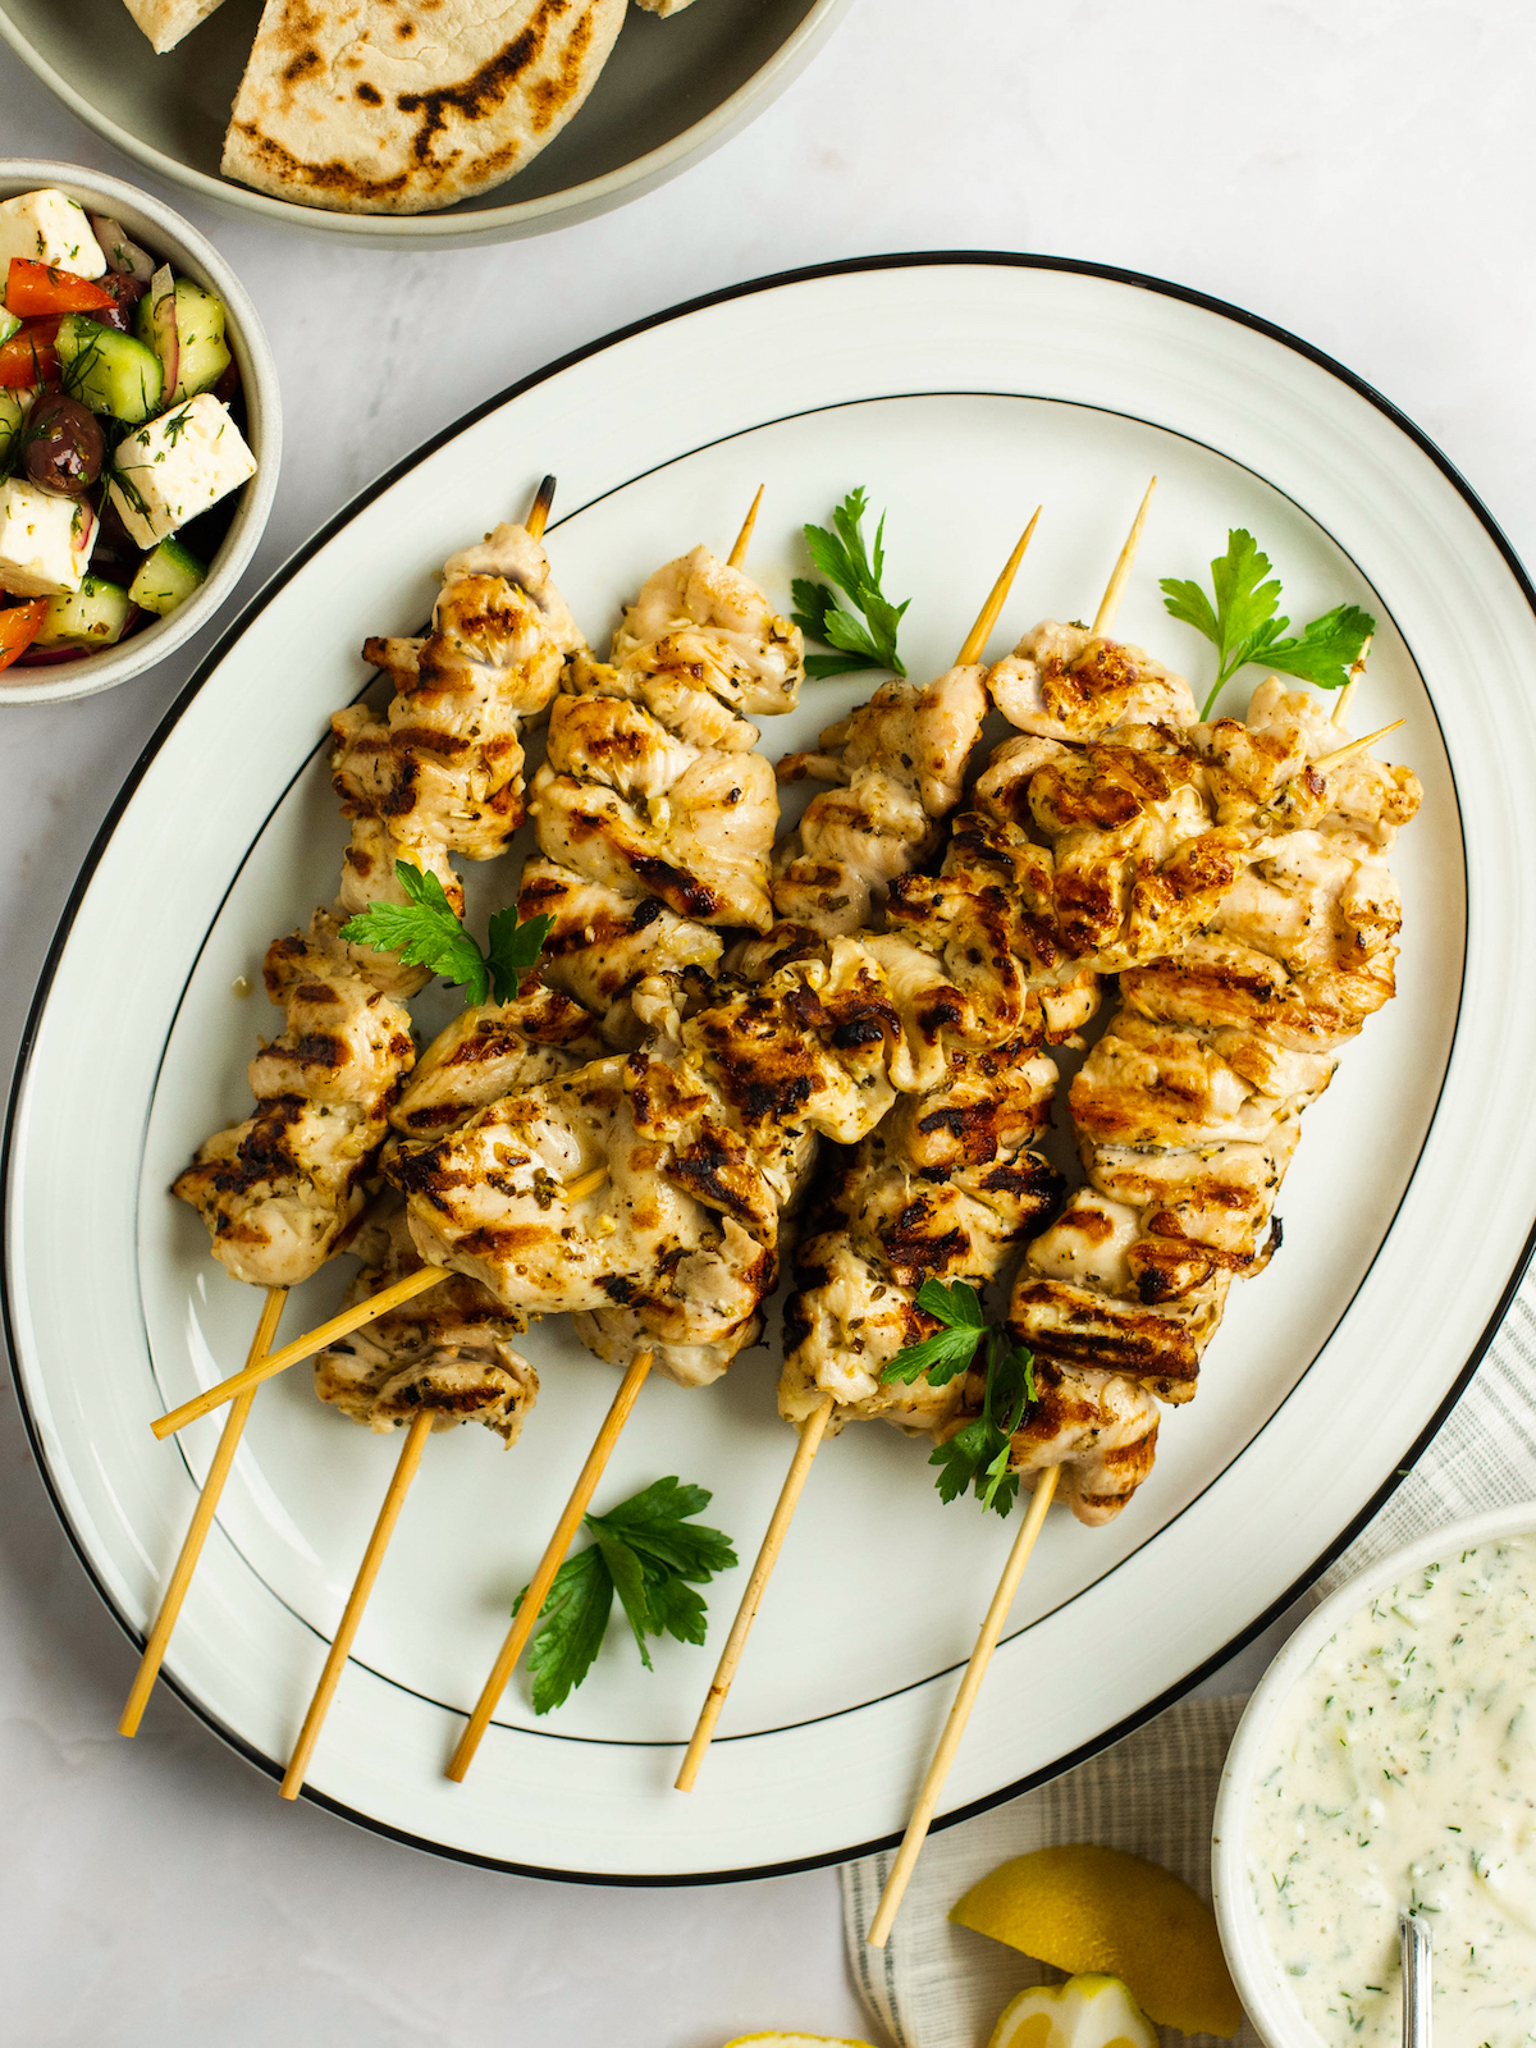 What is the meaning of skewer? - Question about English (US)